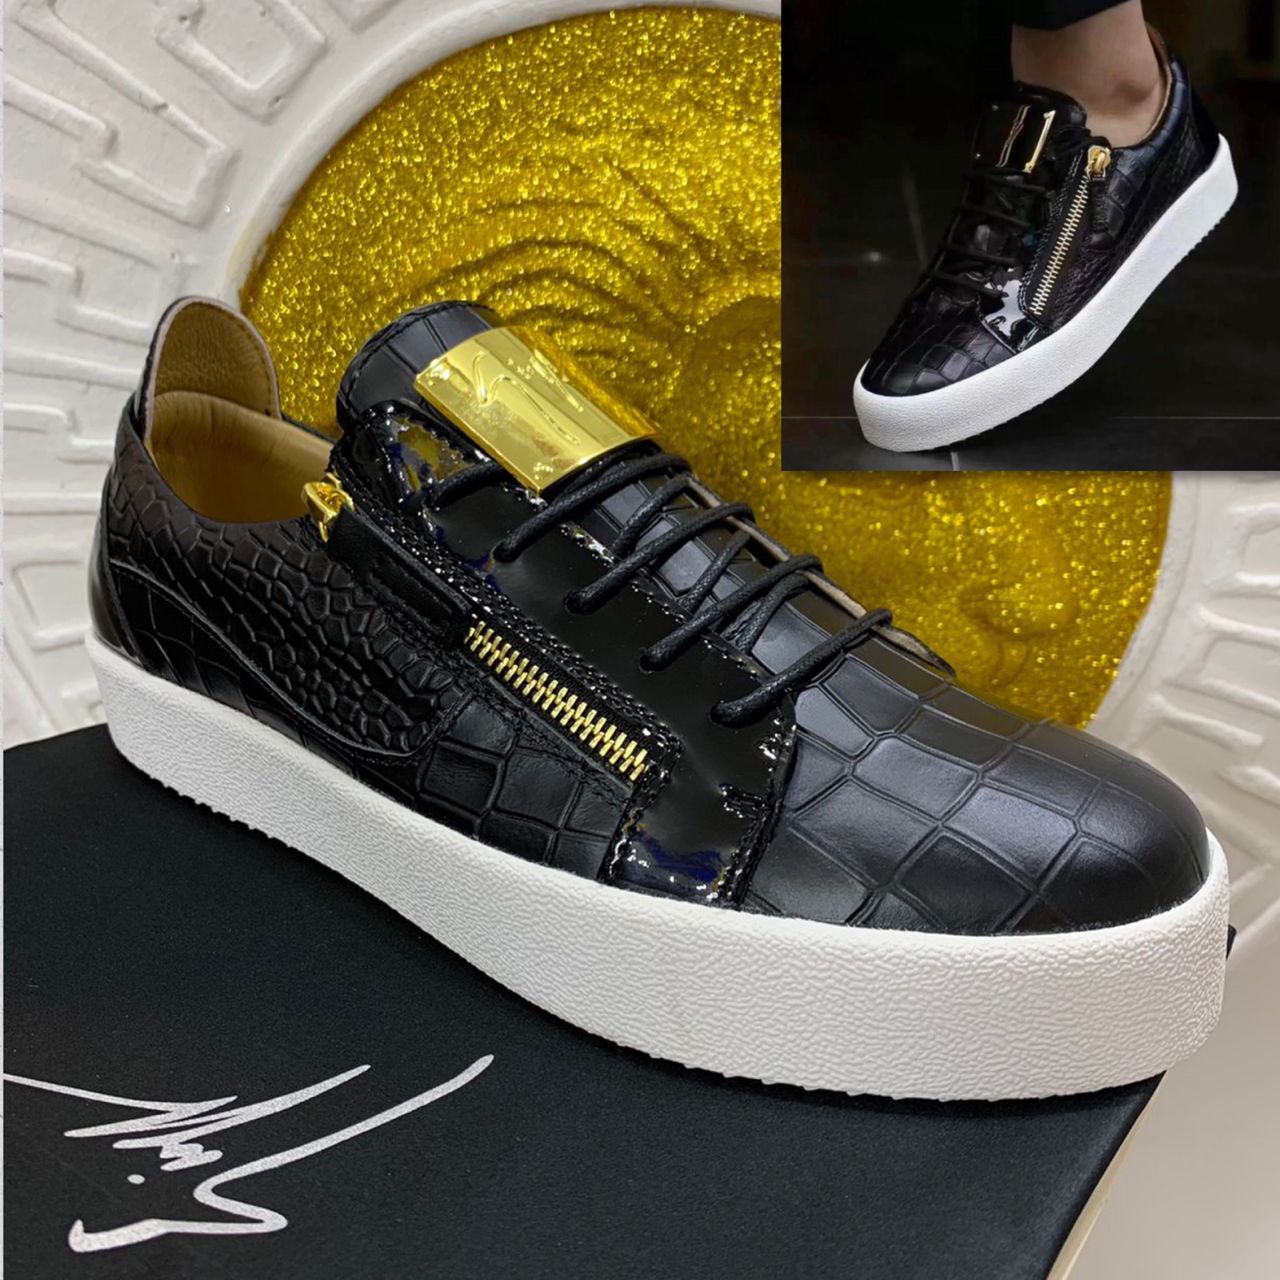 DESIGNERS FASHION MOCK CROC LEATHER SNEAKERS for CartRollers Marketplace For Shopping Online, Fashion, Electronics, Phones, Computers and Buy Men Shoe, Home Appliances, Kitchen-wares, Groceries Accessories, ankara, Aso-Ebi, Beads, Boys Casual Wears, Children Children's Wears ,Corporate Shoes, Cosmetics Dress ,Dresses Fashion, Girls' Dresses ,Girls' Wears, Hair Care ,Jewelries ,Jewelry Kids, Kids' Fashion Ladies ,Wears Lapel Pins, Loafers Shoe Men ,Men's Caftan, Men's Casual Shoes, Men's Fashion, Men's Shoes, Men's Wears, Moccasin Shoe, Natural Hair, In Lagos Nigeria